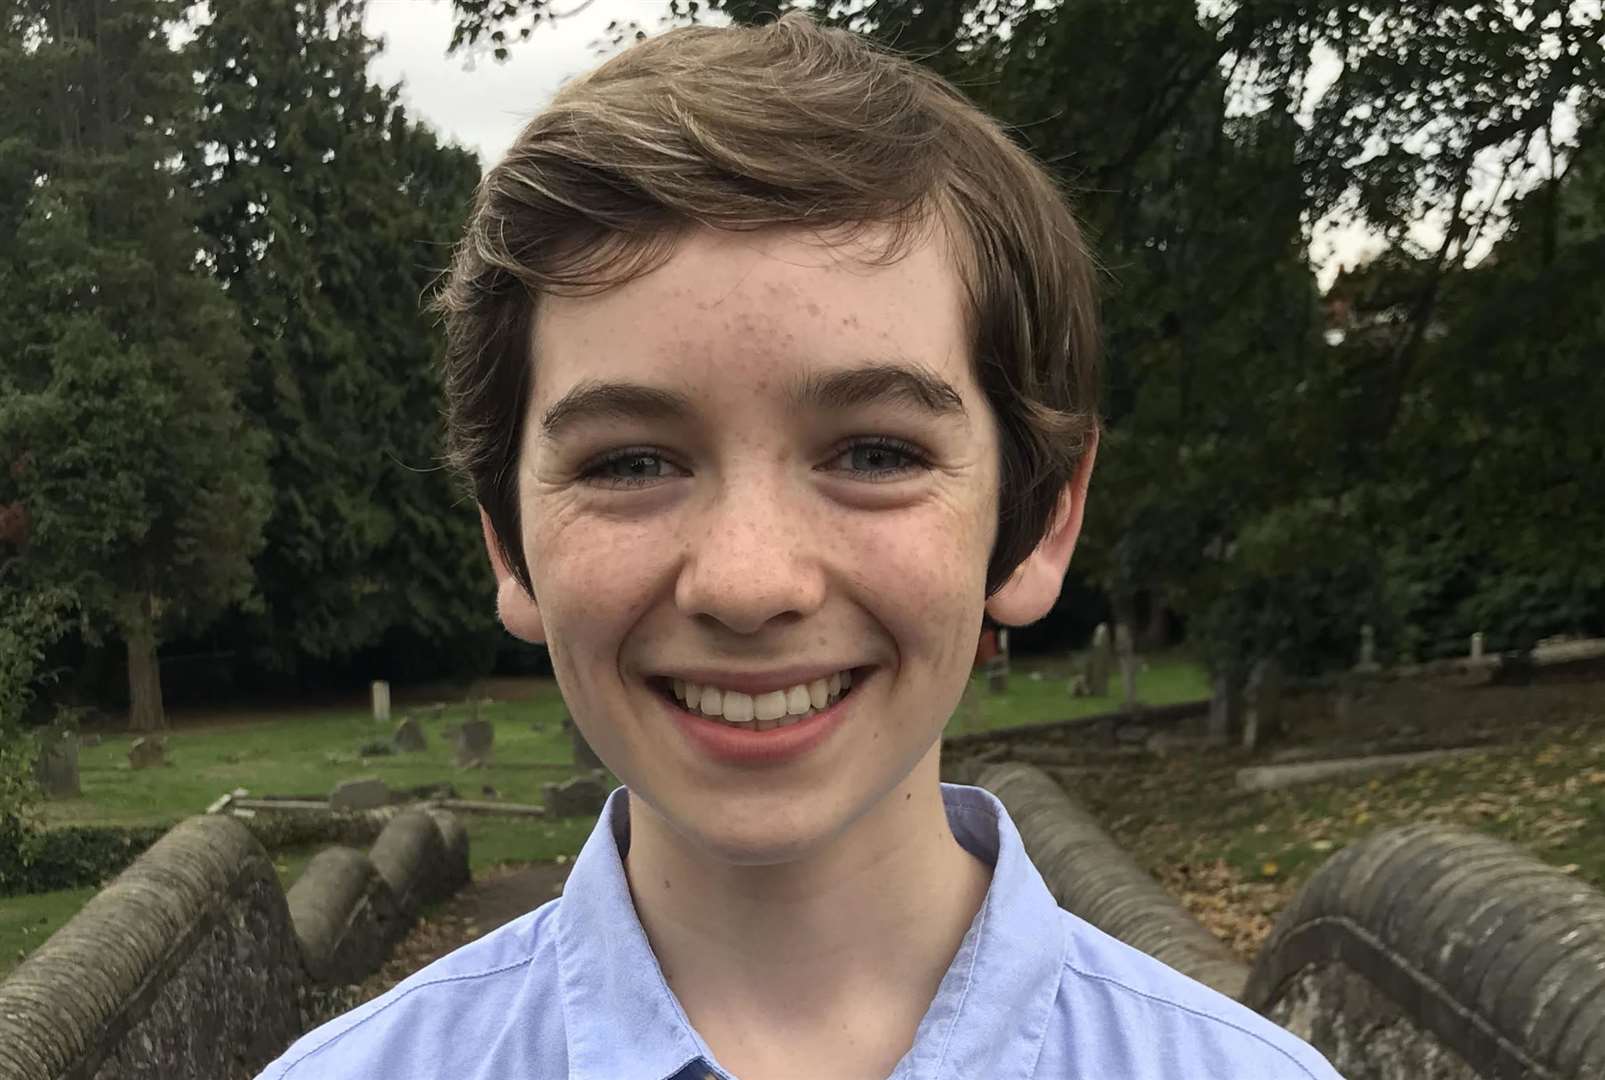 Alex McGovern, 15, works for the Kent Youth County Council (13272803)